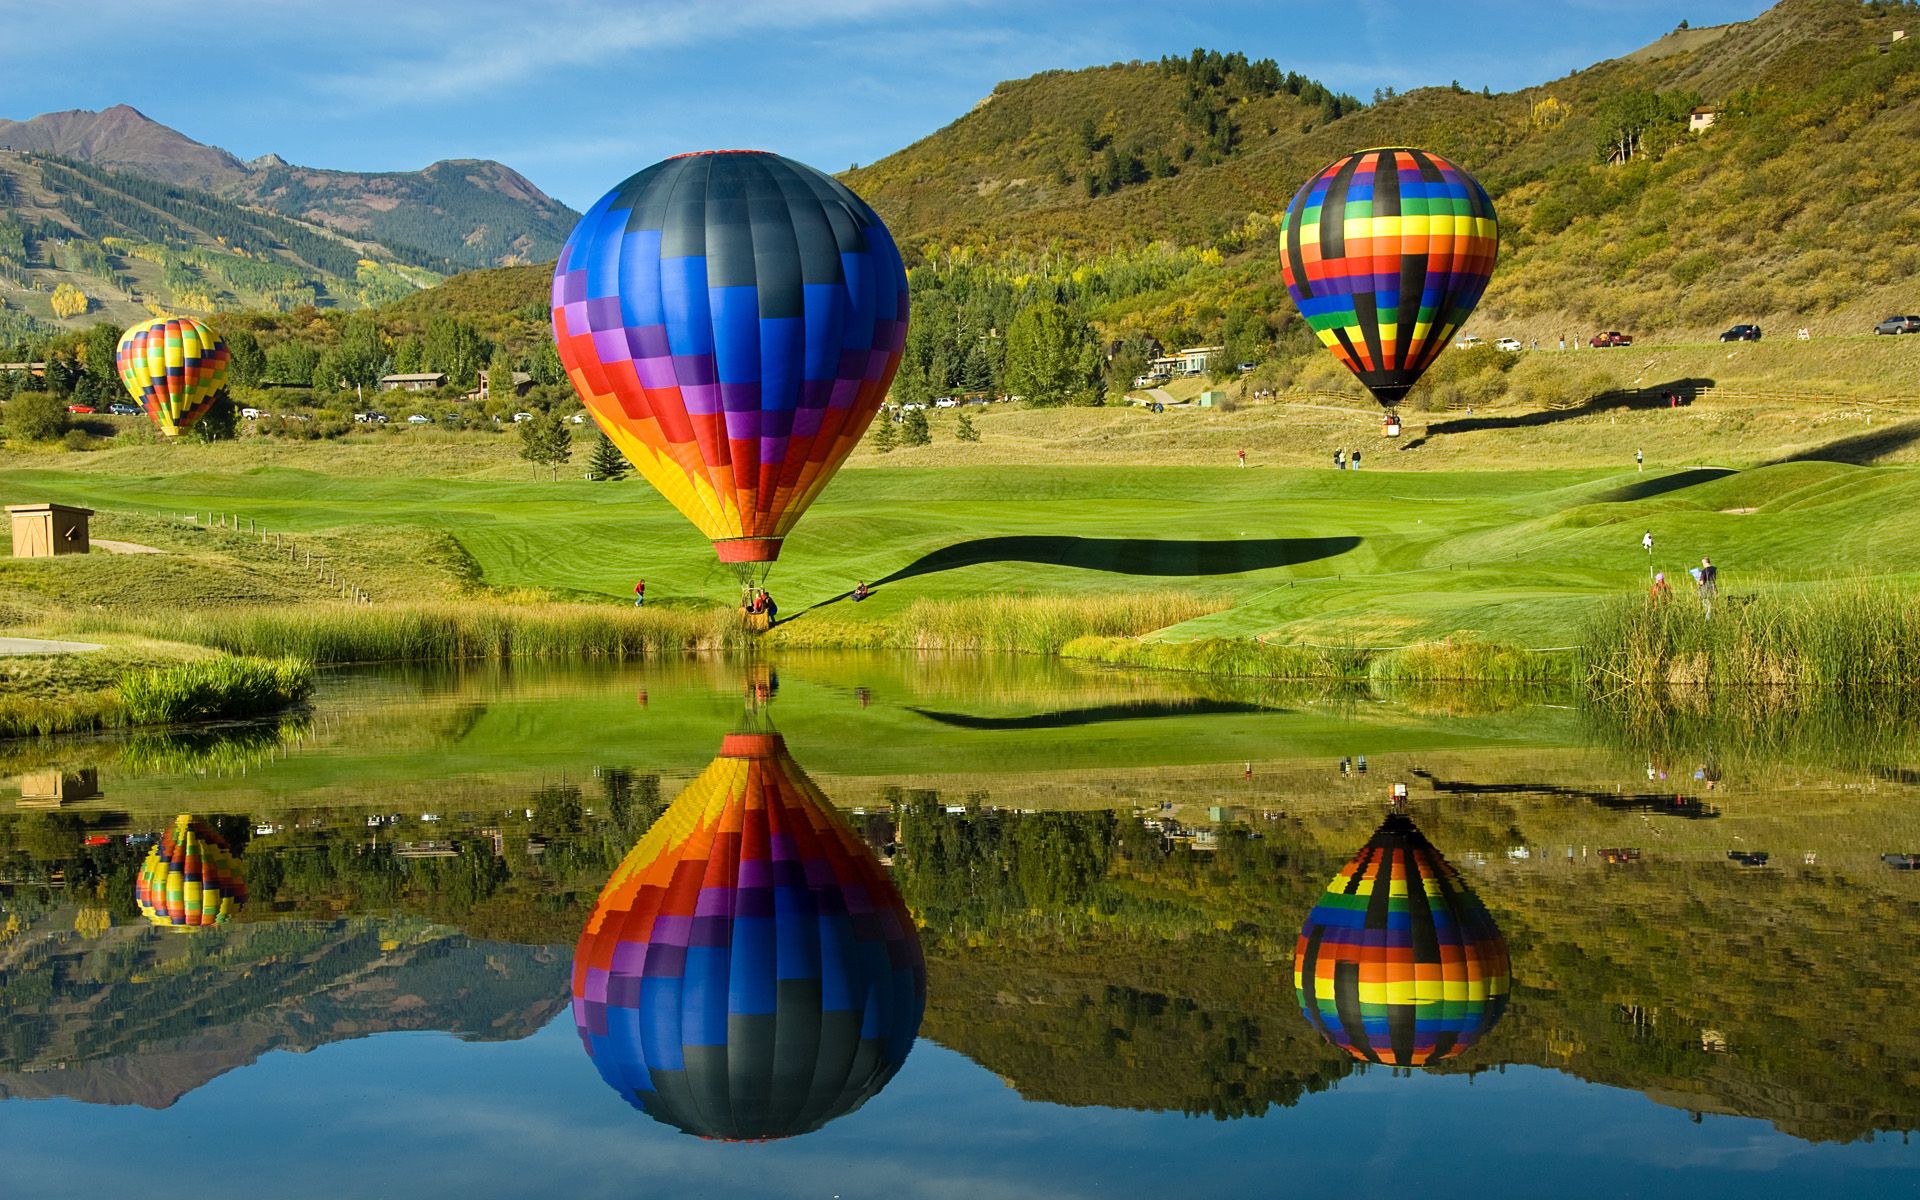 A colorful hot air balloons flying over a green field. - Hot air balloons